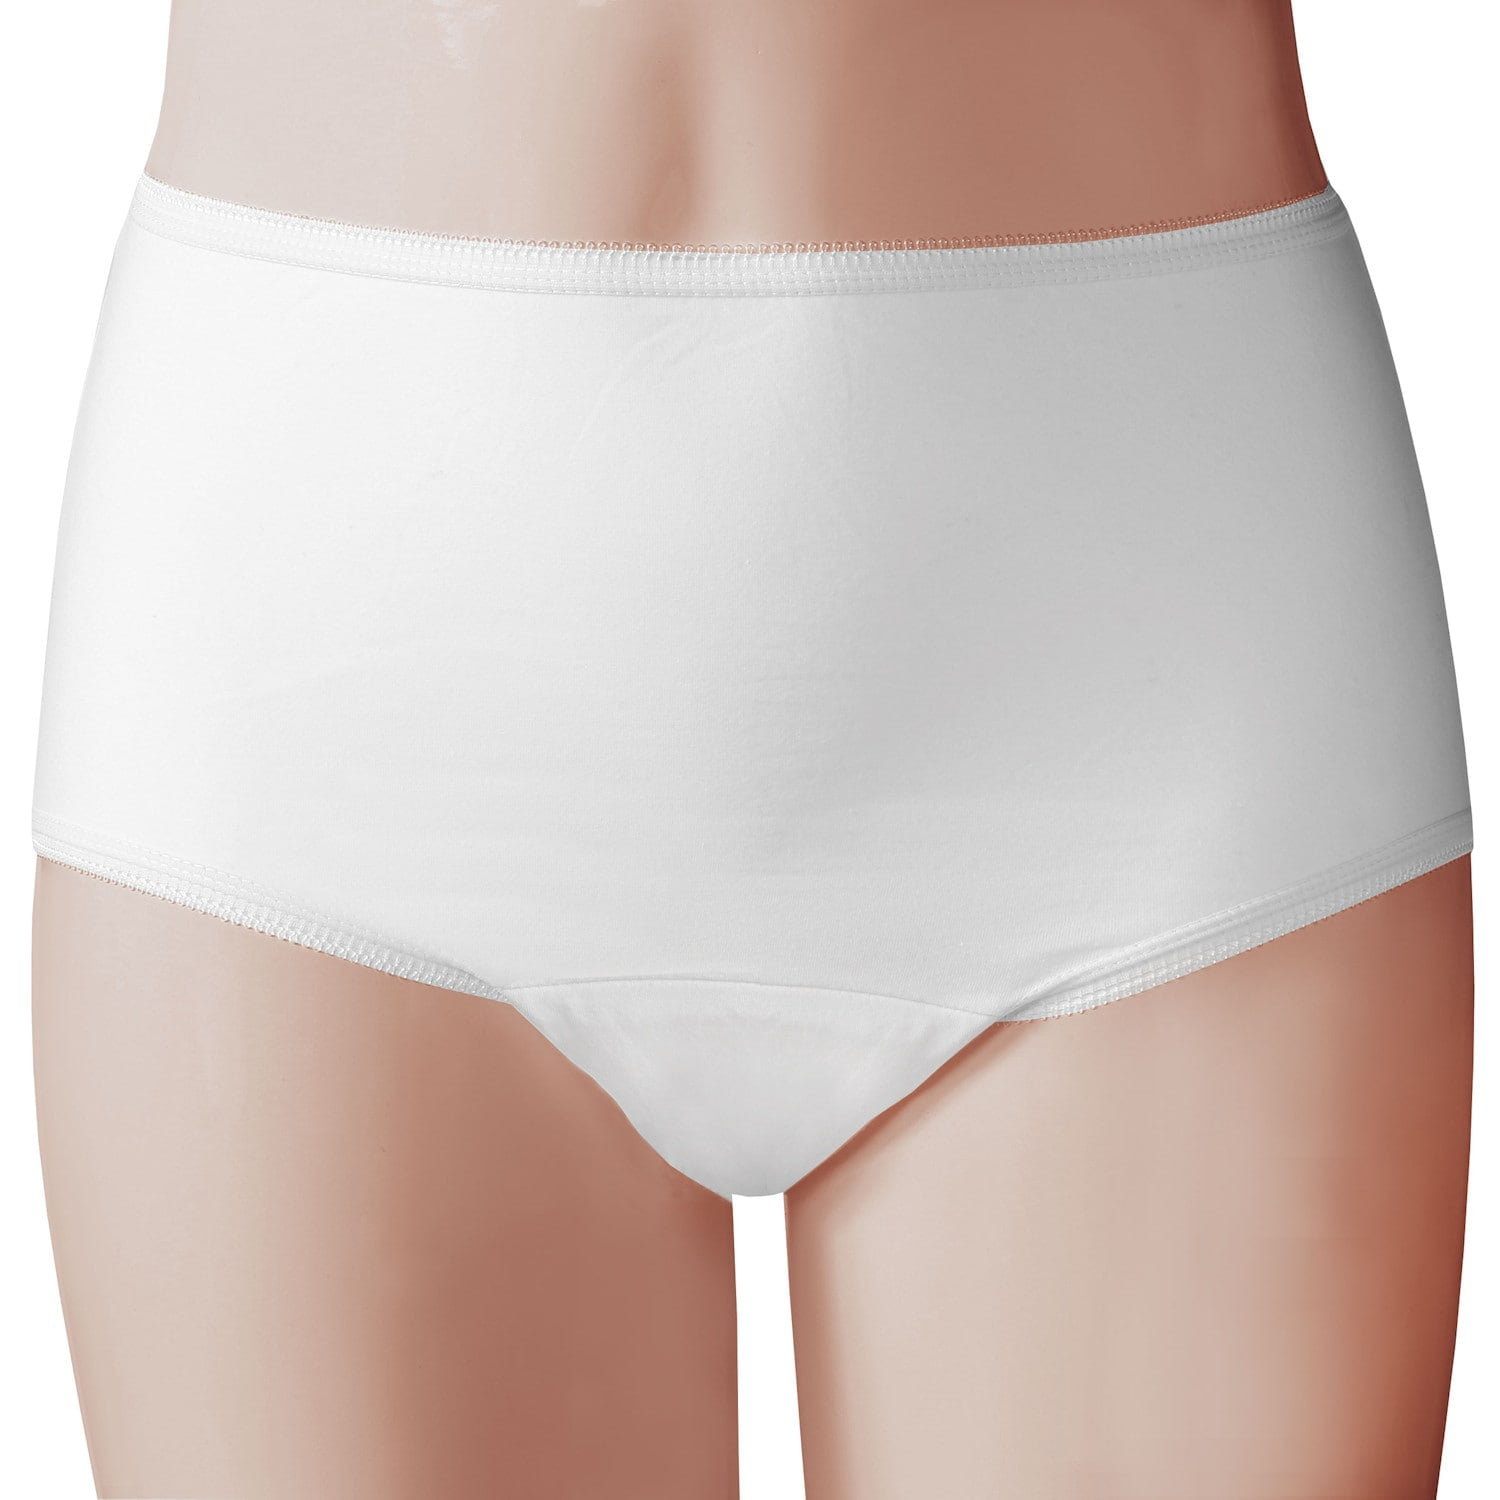 WOMENS DISPOSABLE 100% COTTON UNDERWEAR - FOR TRAVEL- HOSPITAL STAYS-  EMERGENCIES 10-PACK 